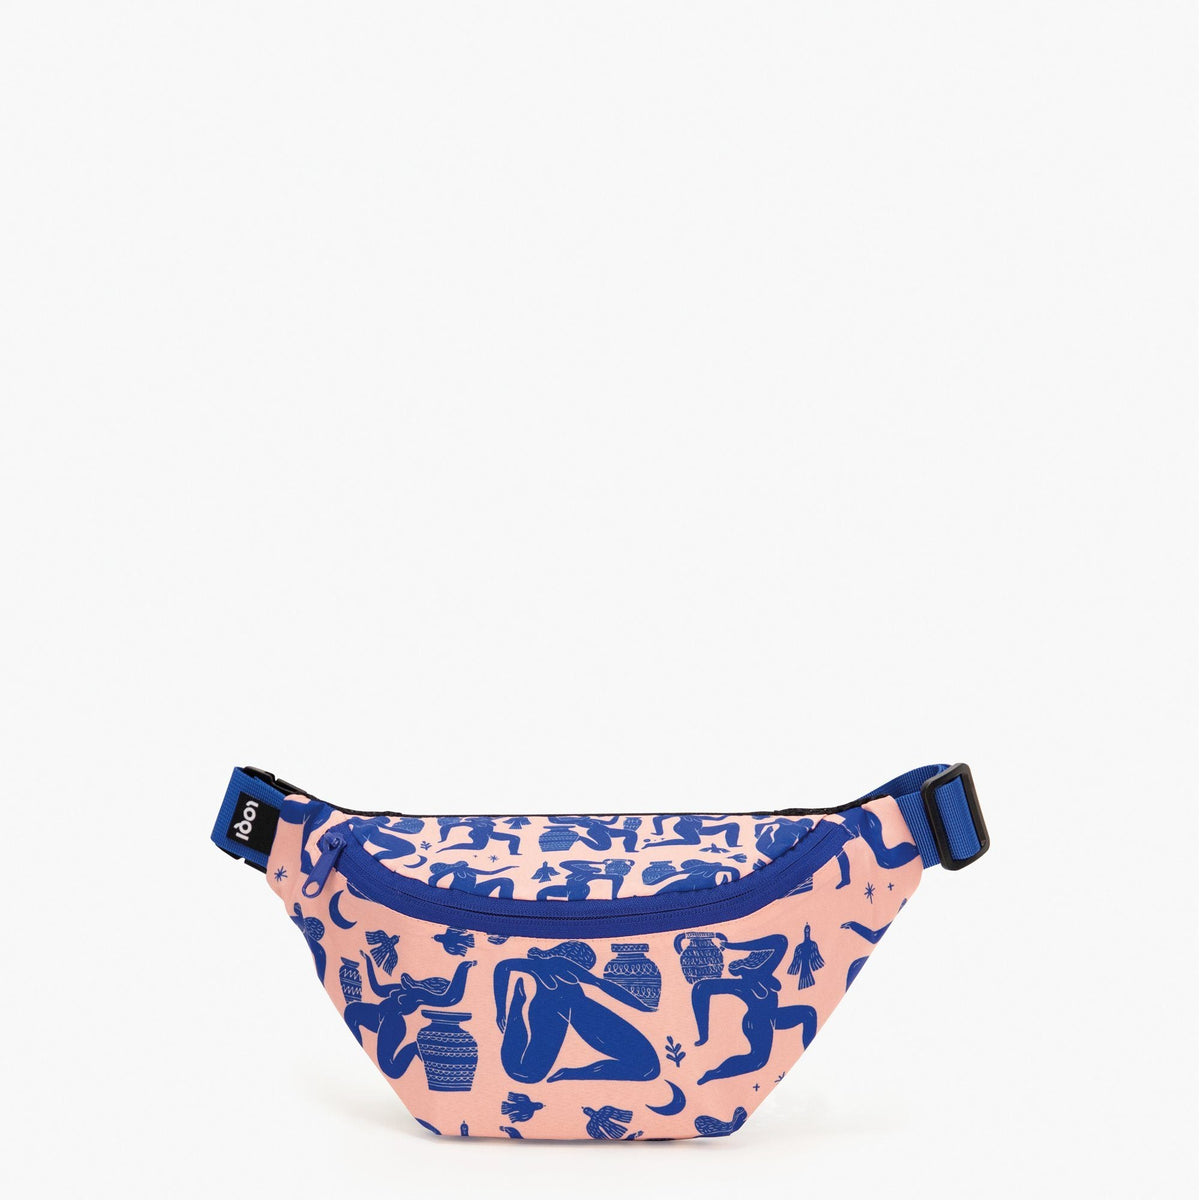 LOQI Mark Conlan Ladies and Vases Recycled Bumbag